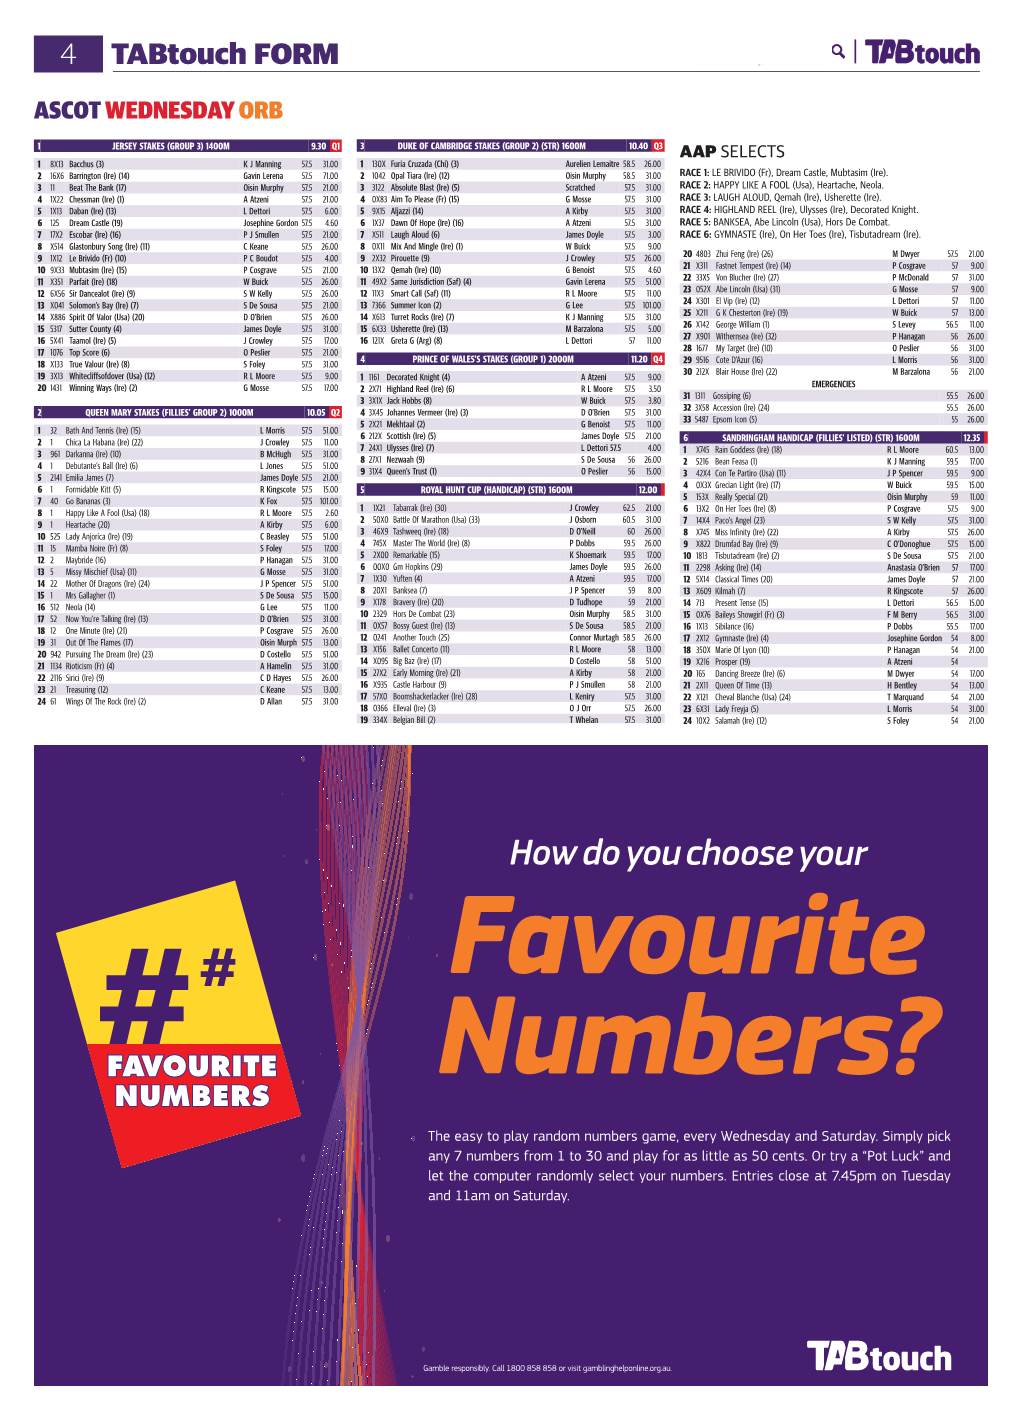 How Do You Choose Your Favourite Numbers?